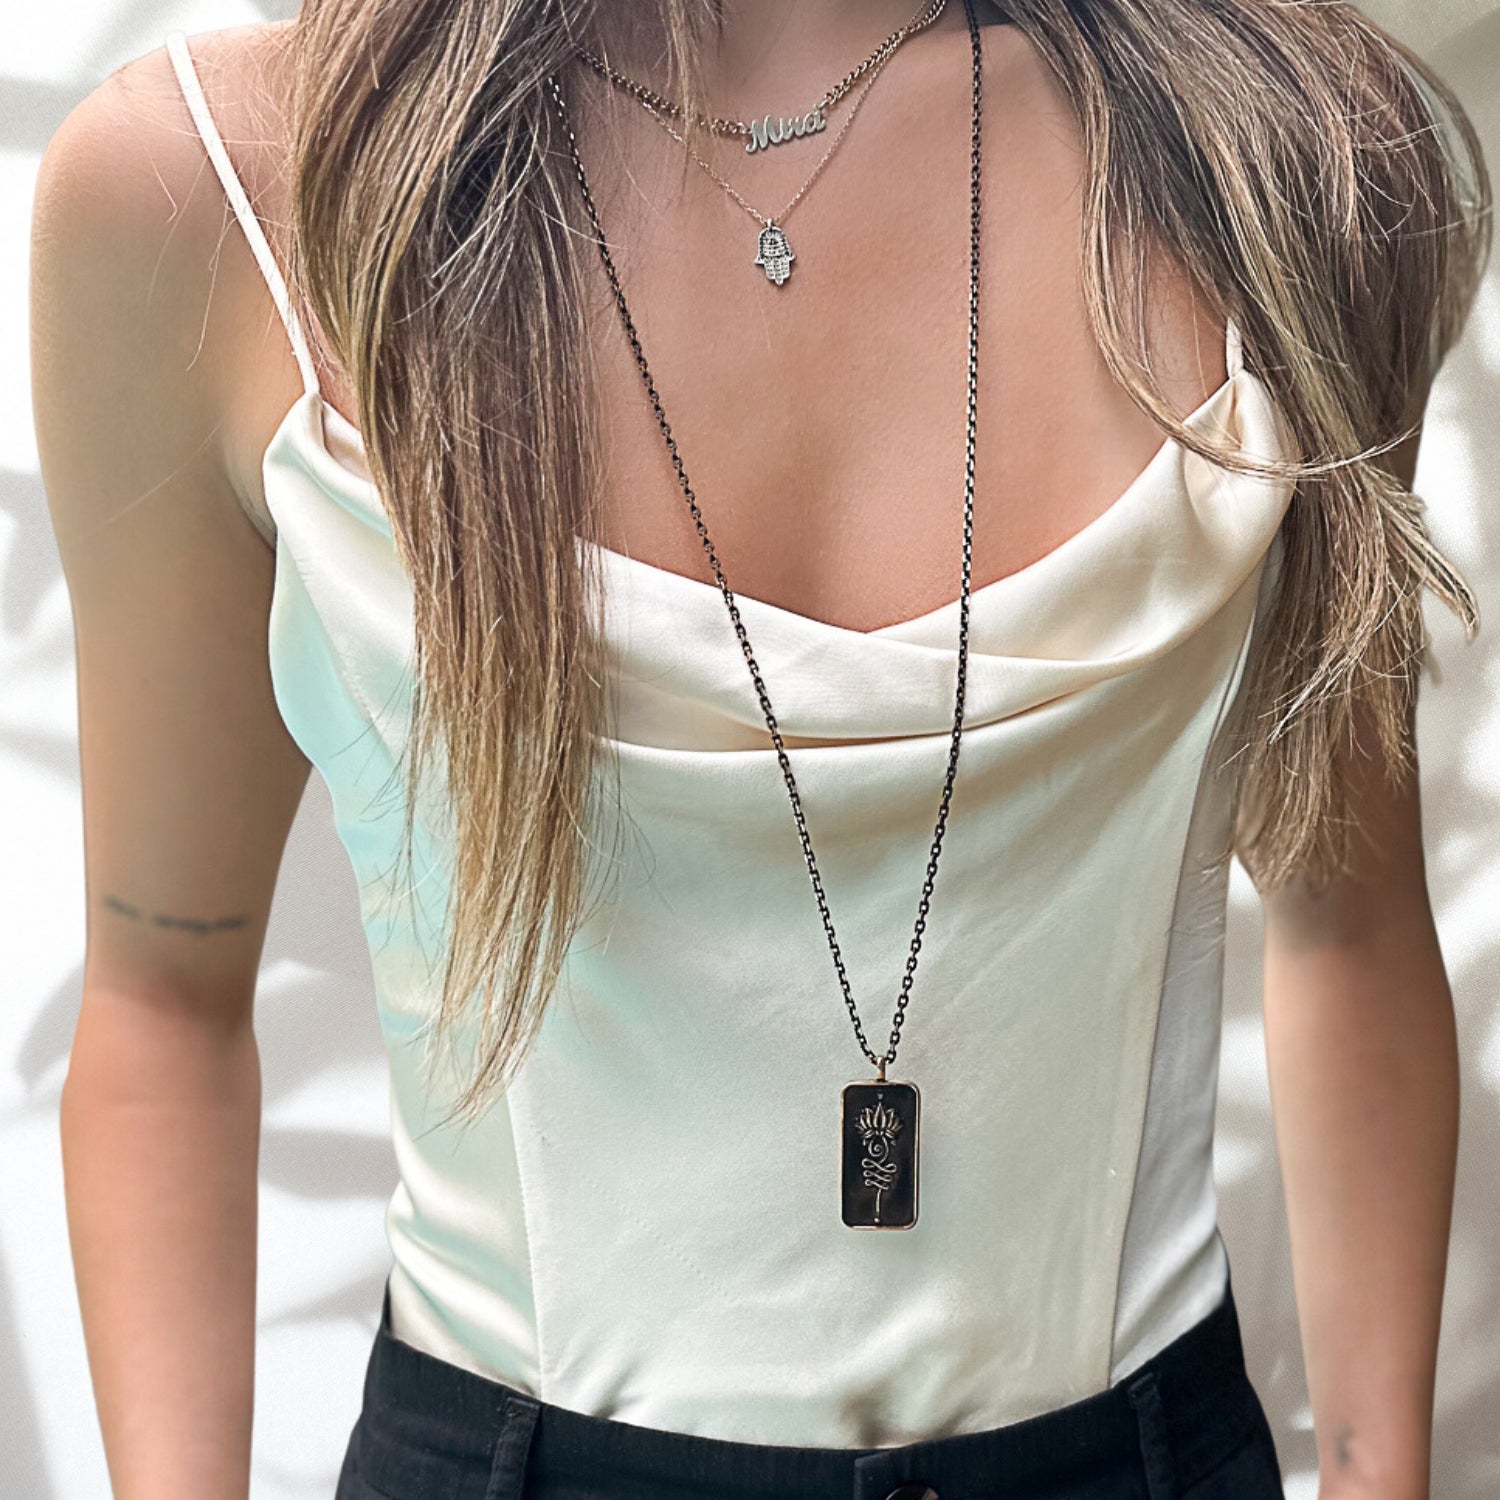 See how the Love Yourself Unalome Necklace beautifully complements our model&#39;s style, radiating self-love and confidence.